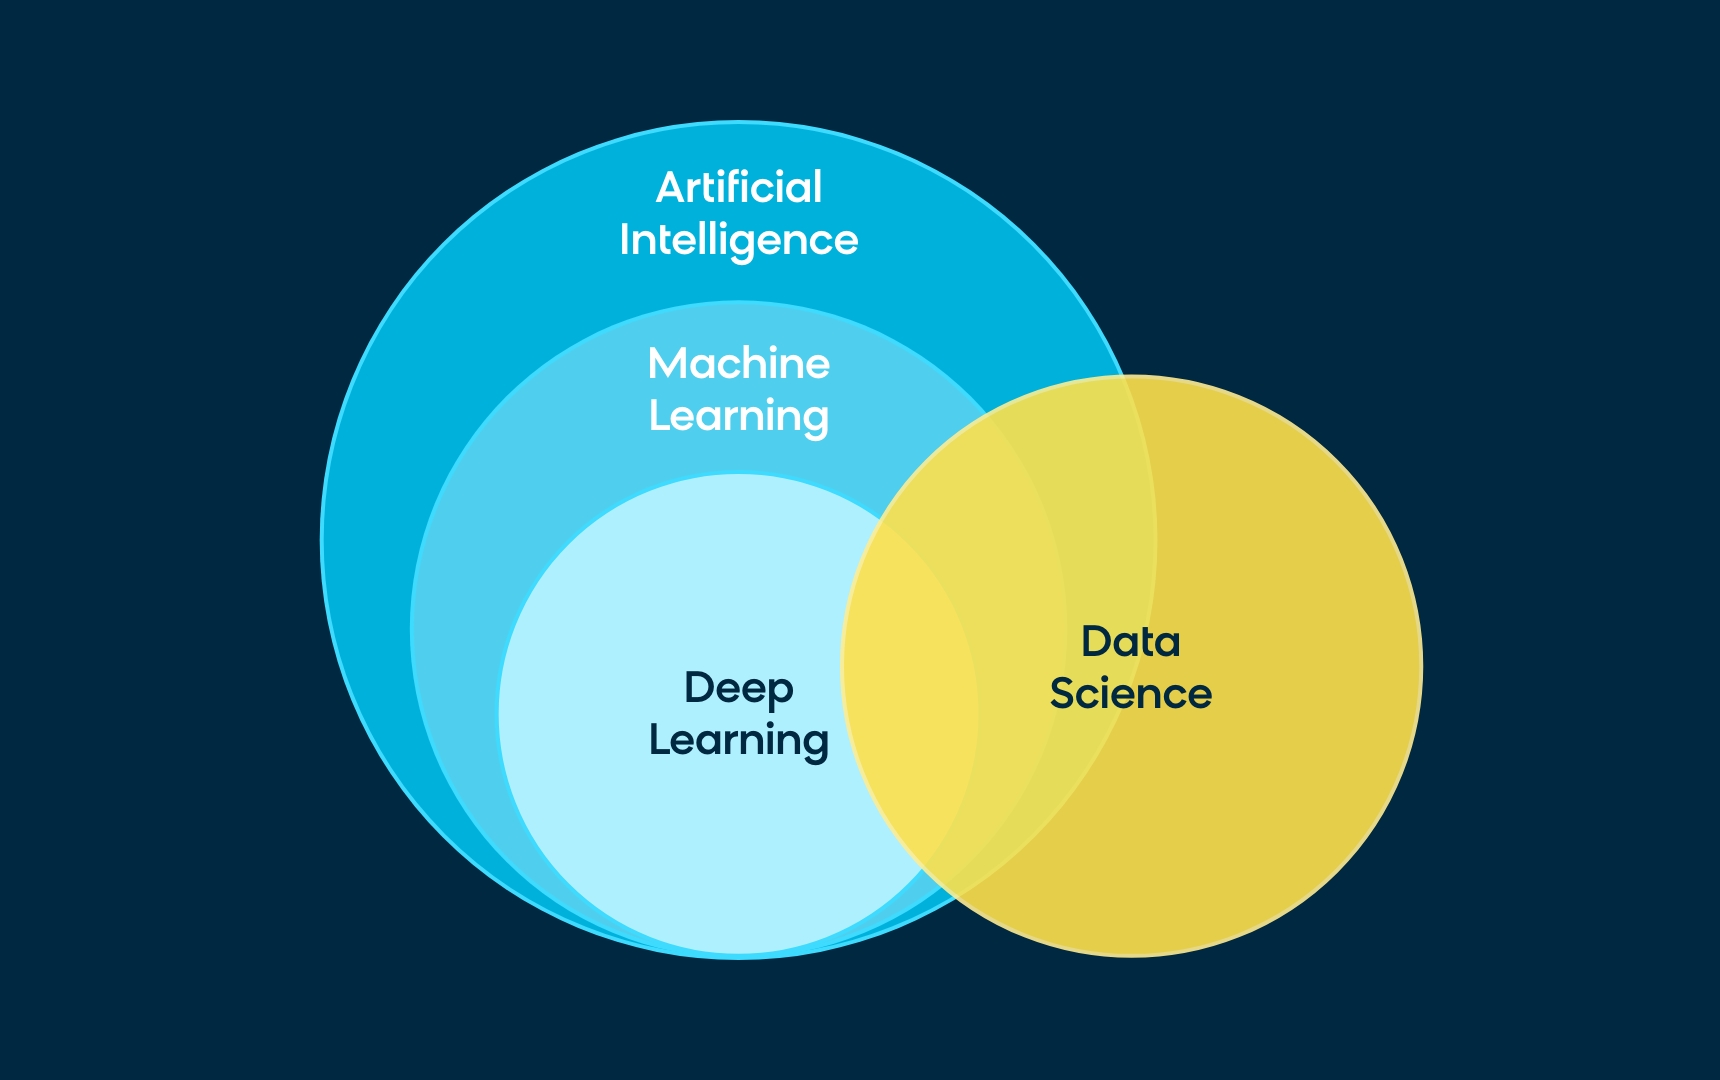 Diagram Breaking Down AI - Artificial Intelligence, Machine Learning, Deep Learning, Data Science